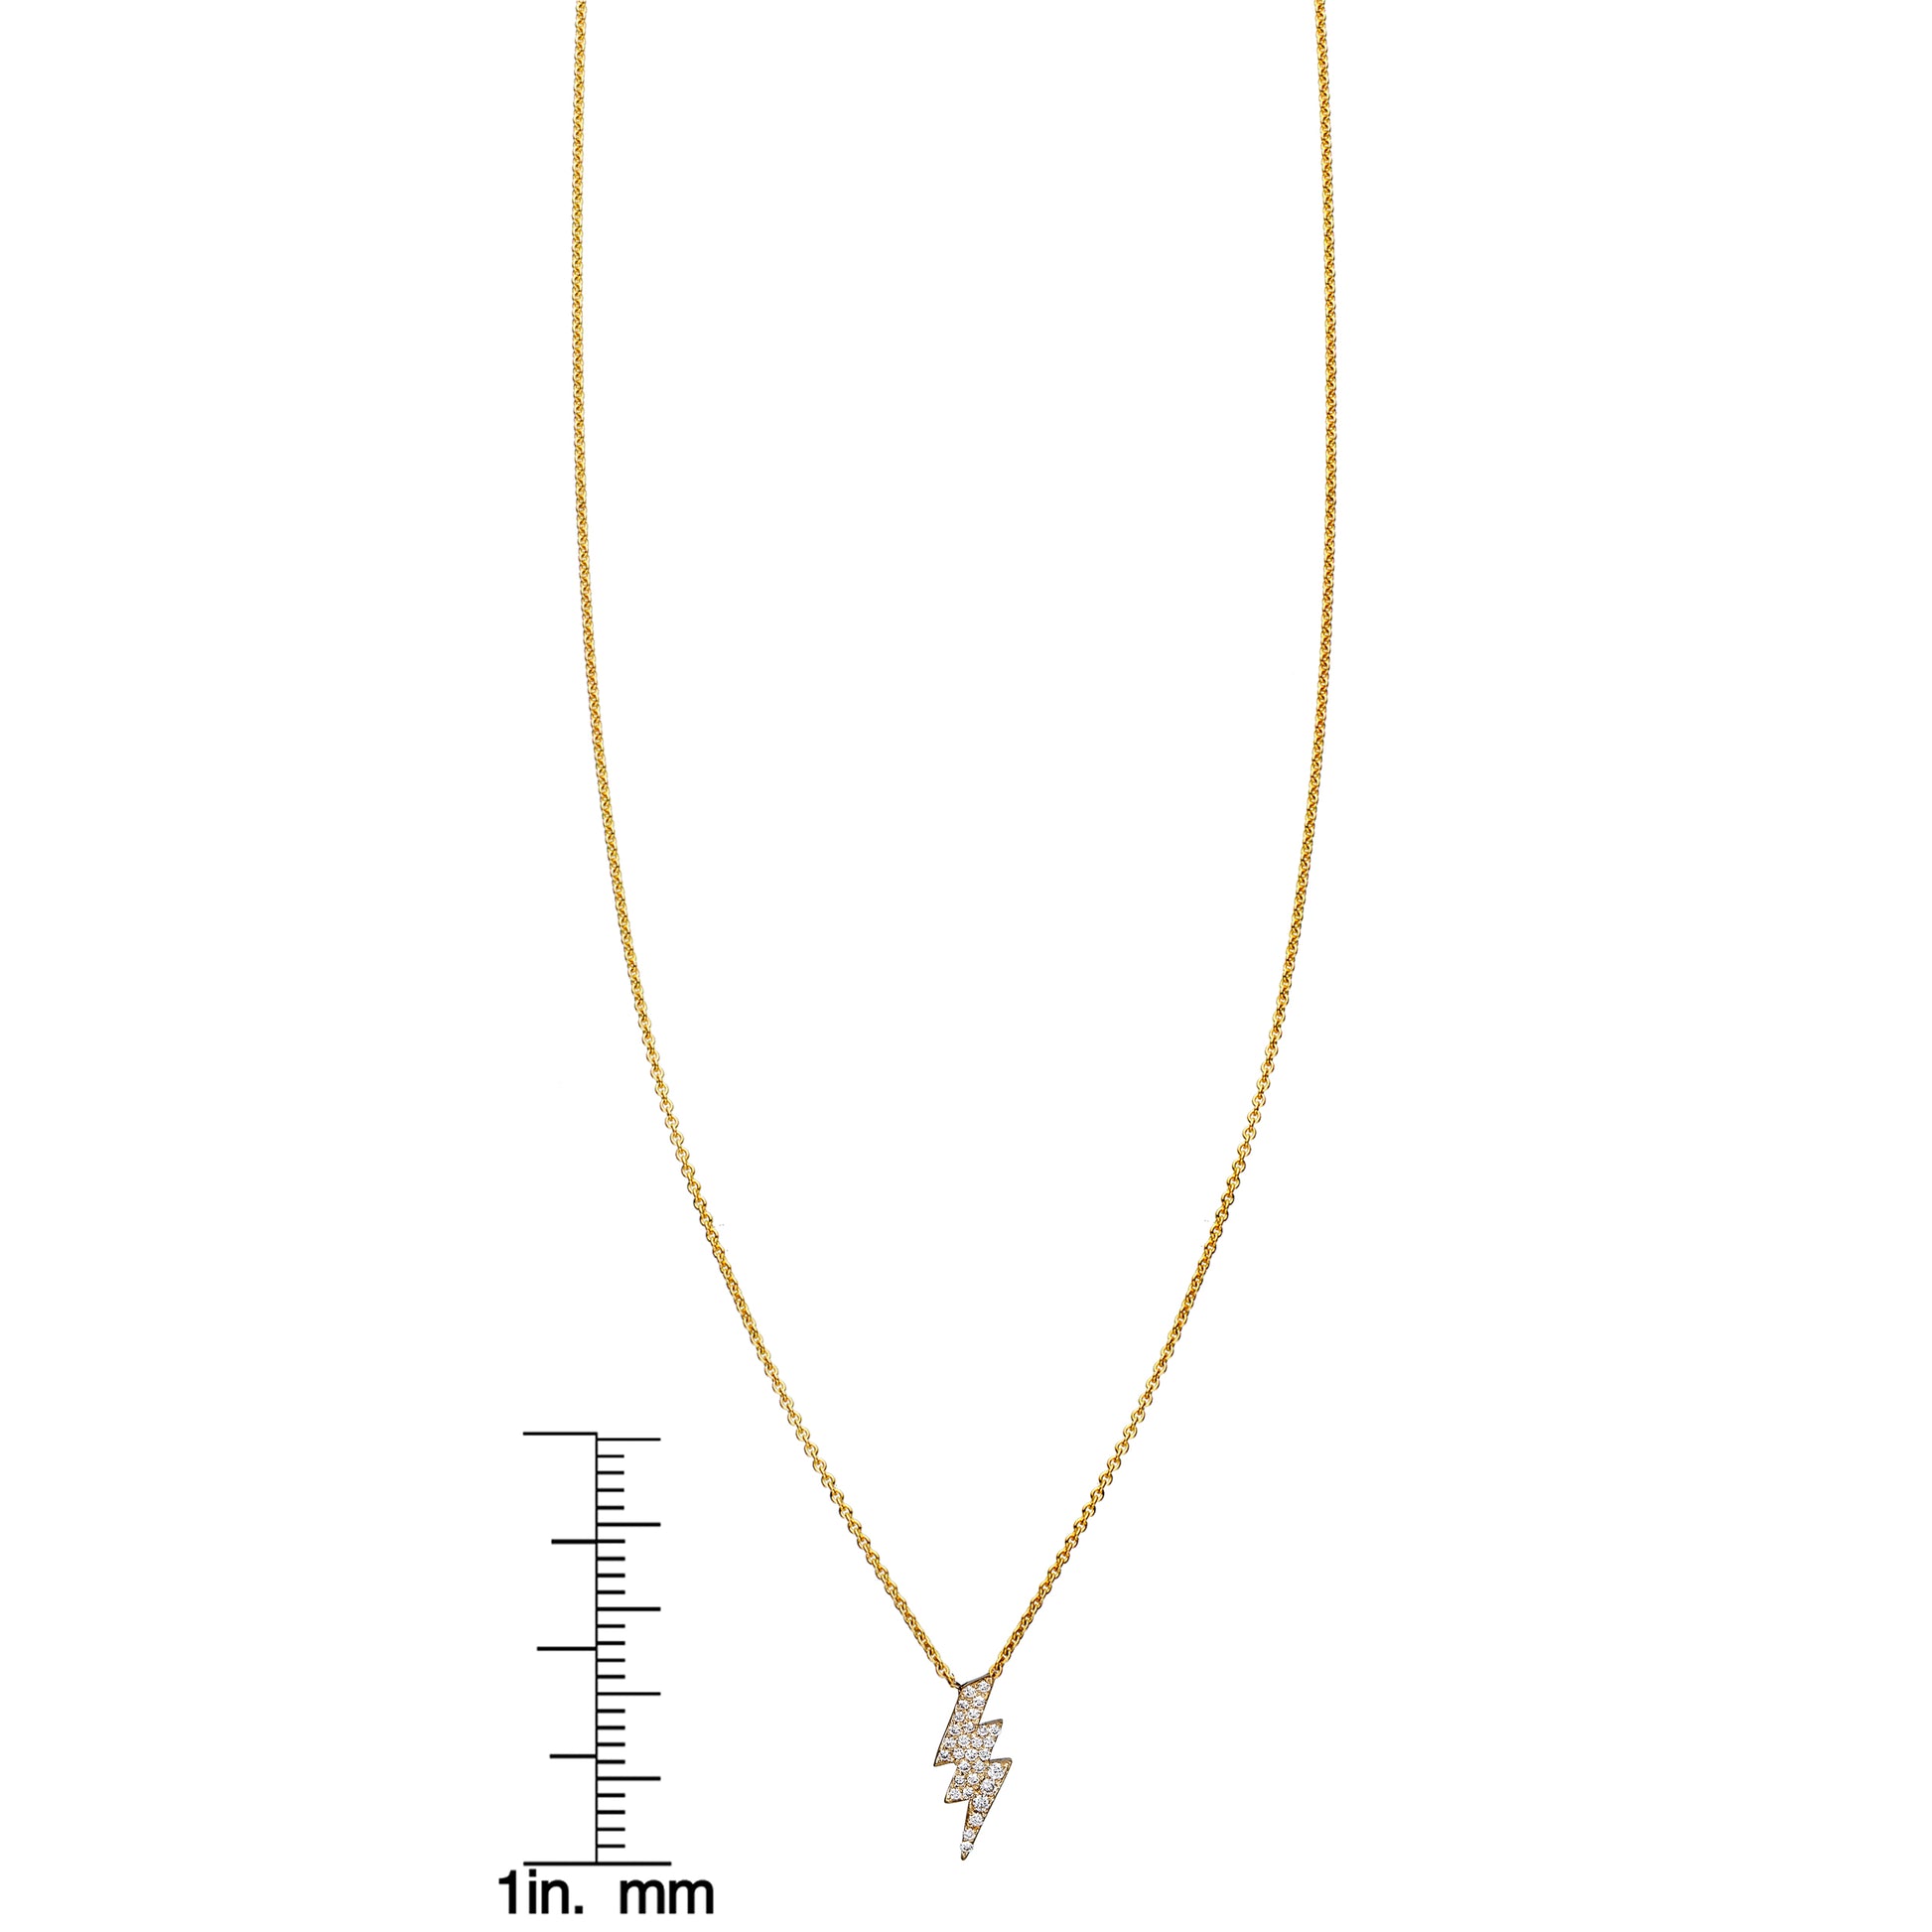 white diamond gold lightning necklace with ruler_6200158c 85f6 45a7 a76f dc12e65c265c